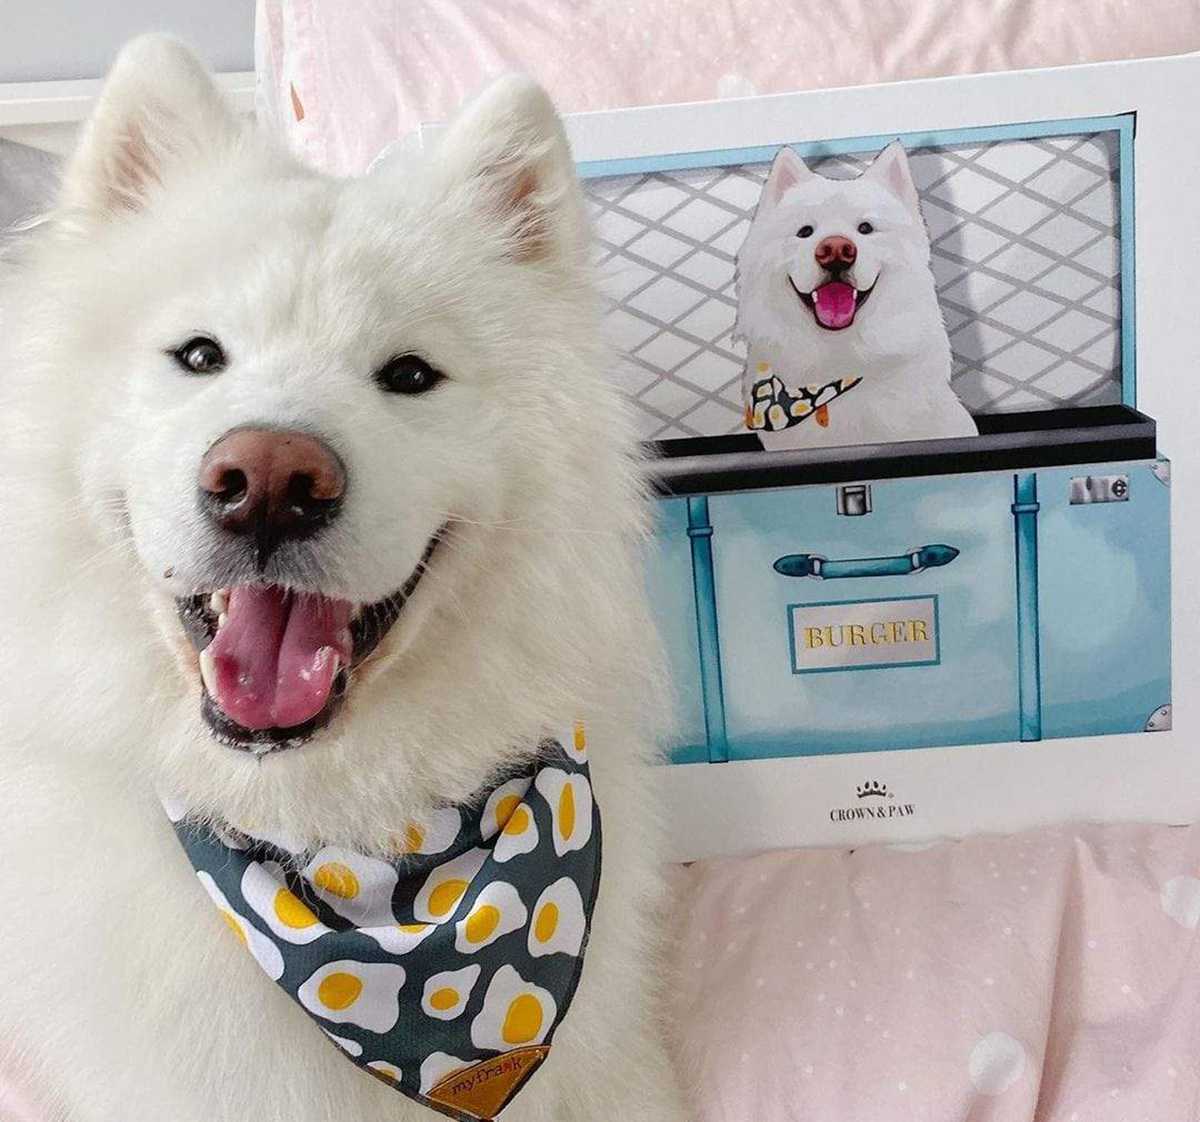 Amazing Pet Gifts To Spoil Your Fur-baby This Holiday